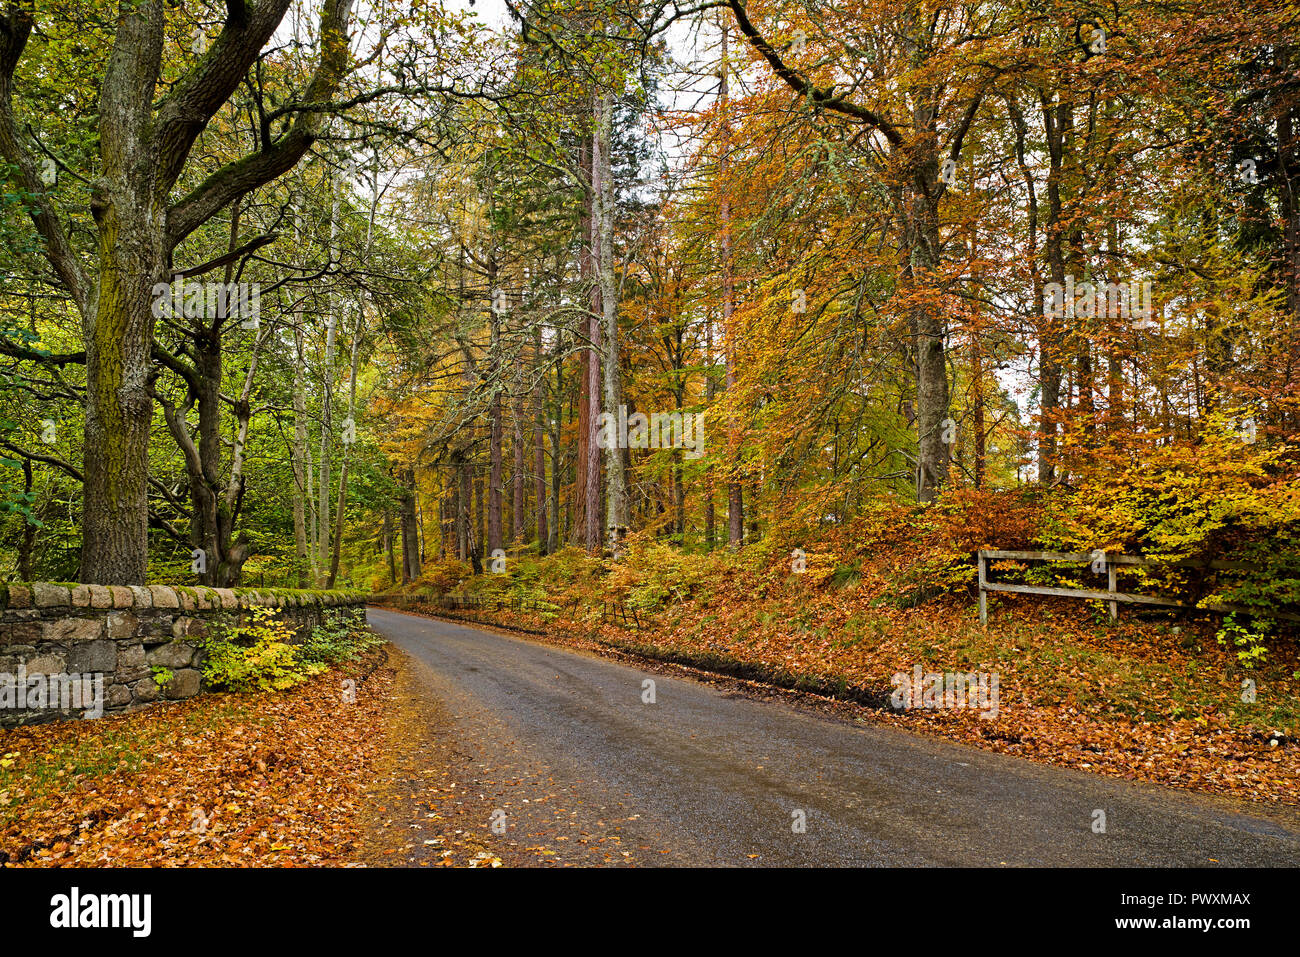 Beautiful autumn colours on Rothiemurchus Estate, tree-lined country lane near Inverdruie, by Aviemore, Cairngorms National Park, Scottish Highlands. Stock Photo